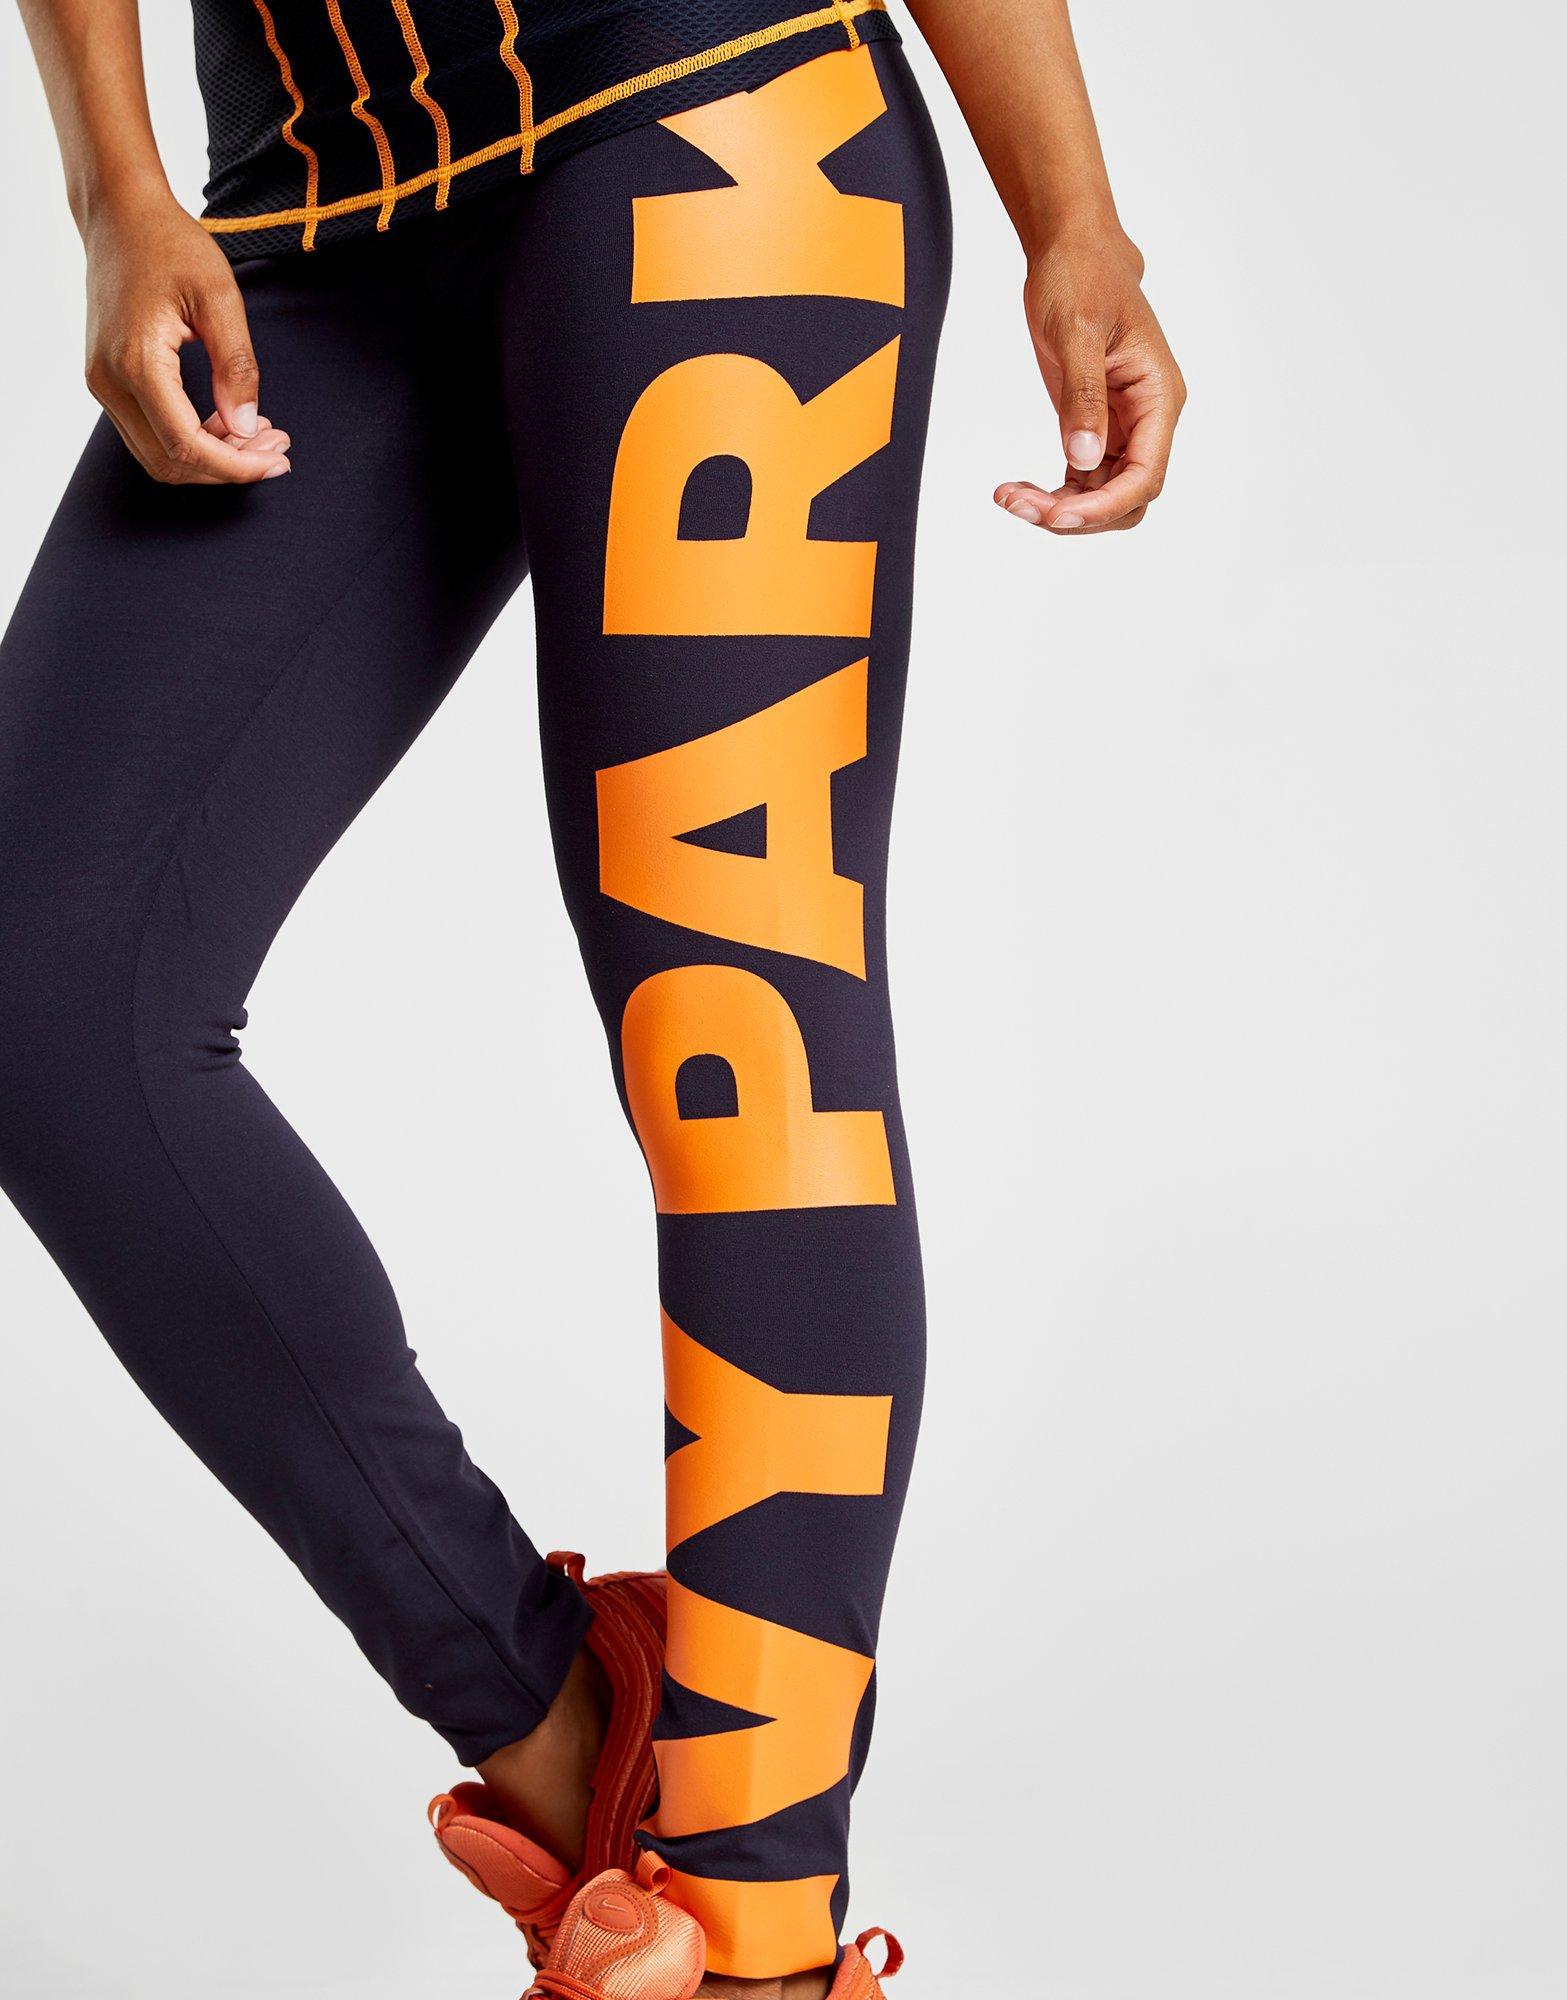 TOPSHOP Synthetic Oversized Logo Leggings By Ivy Park in Blue/Orange (Blue)  - Lyst